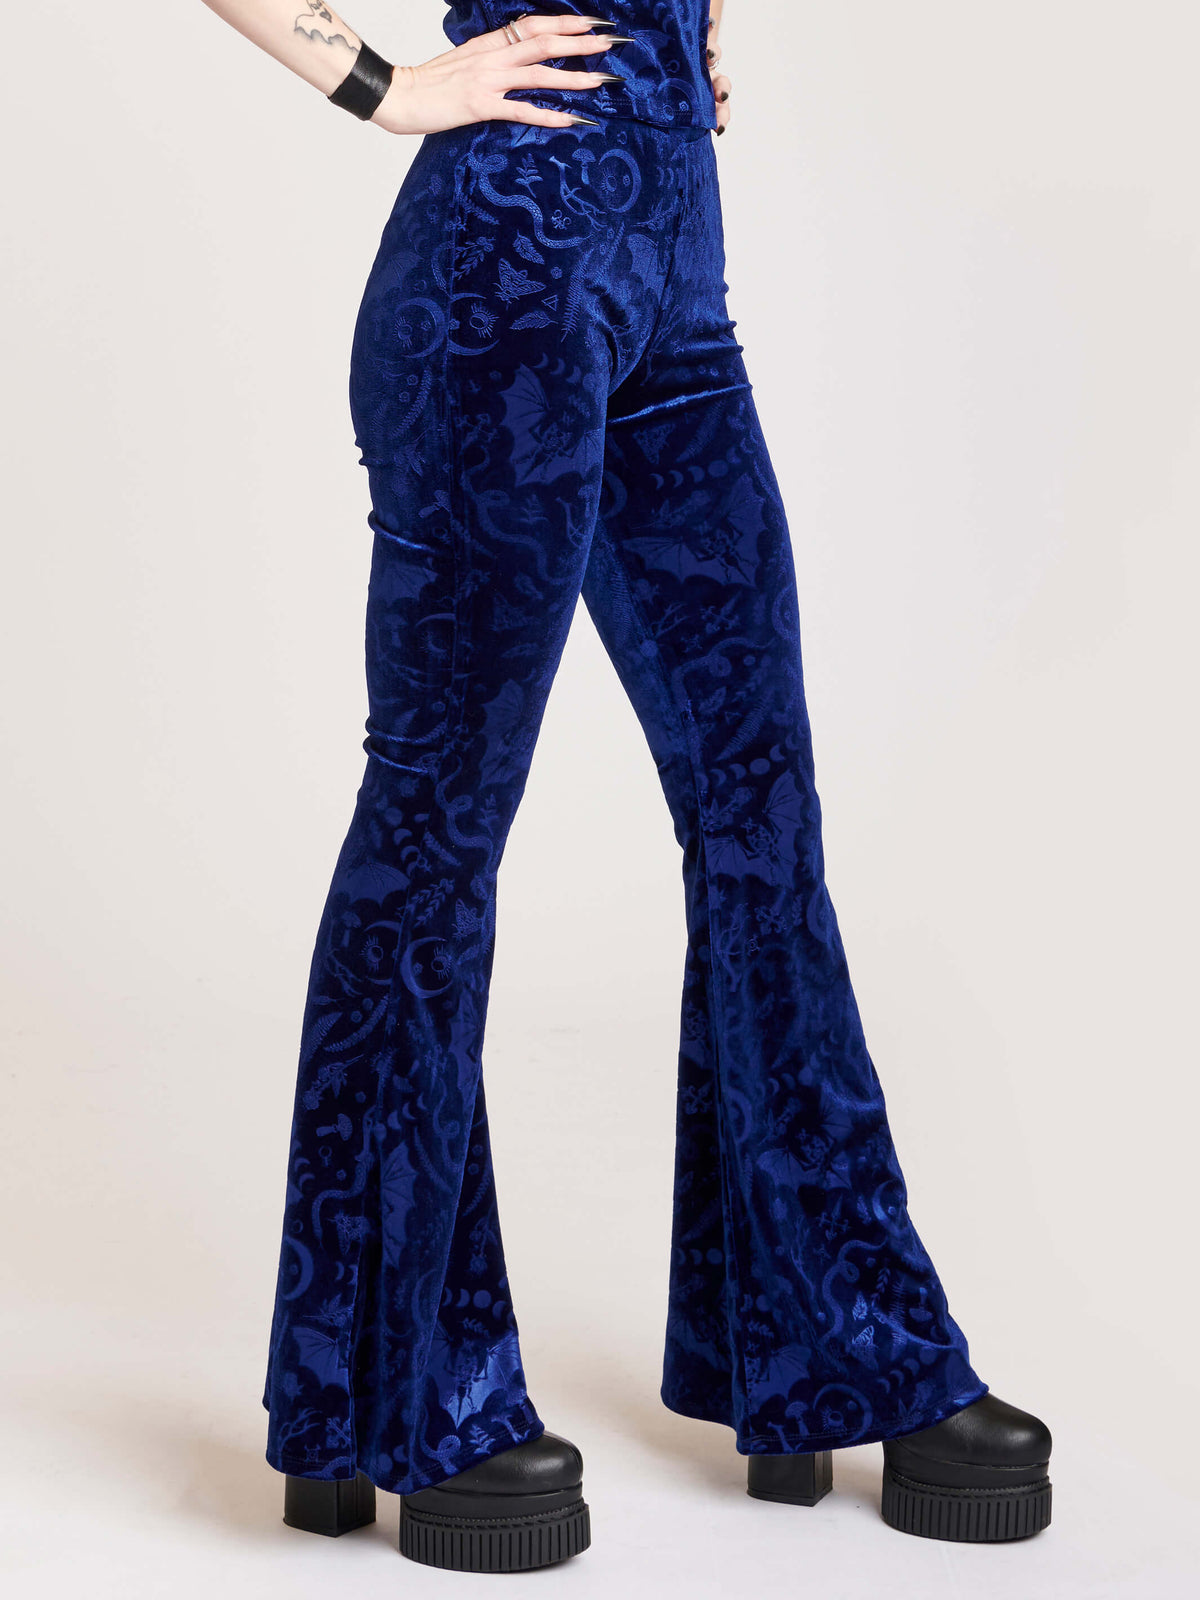 embossed velvet flaired pants with forest findings symbols